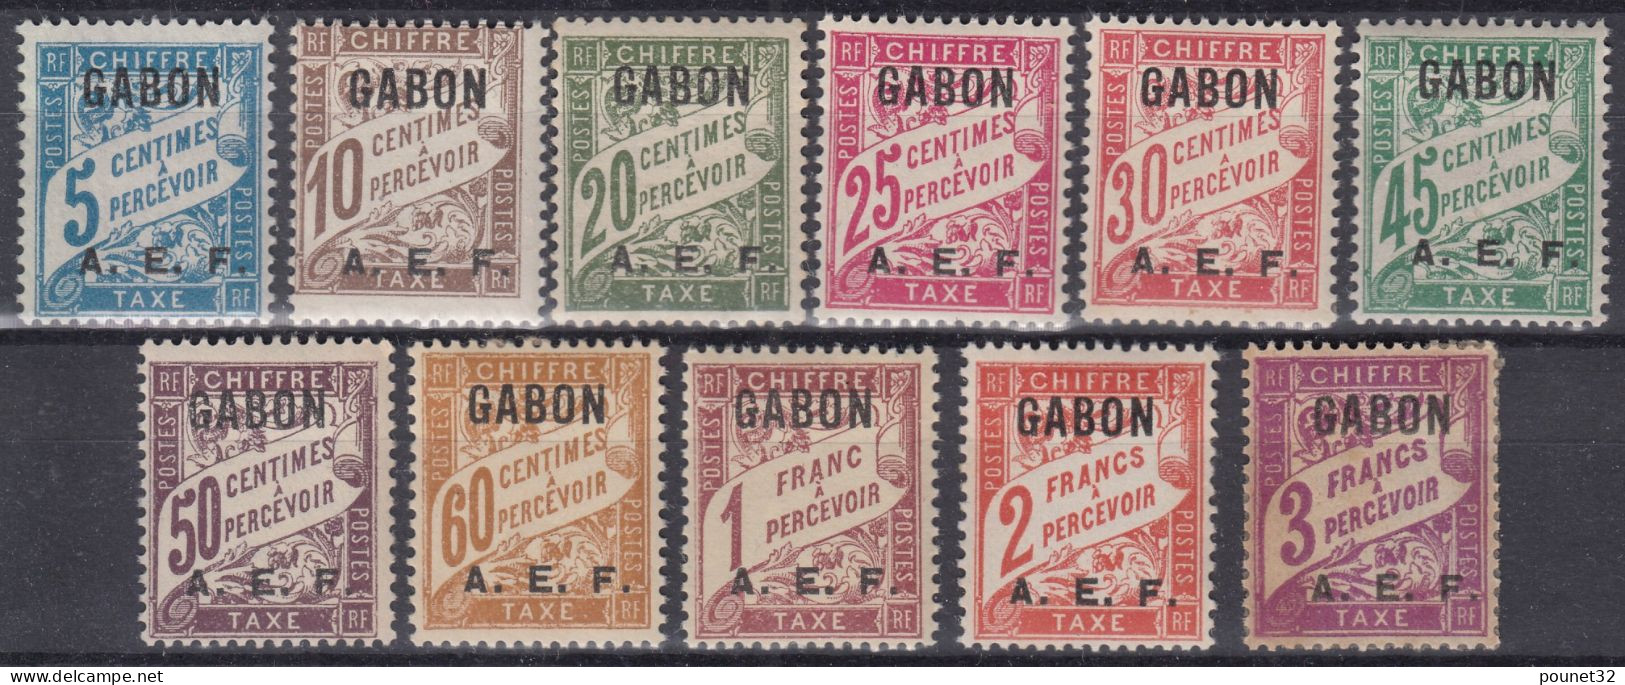 GABON SERIE TAXE COMPLETE N° 1/11 NEUFS * GOMME COLONIALE TRACE DE CHARNIERE - Timbres-taxe